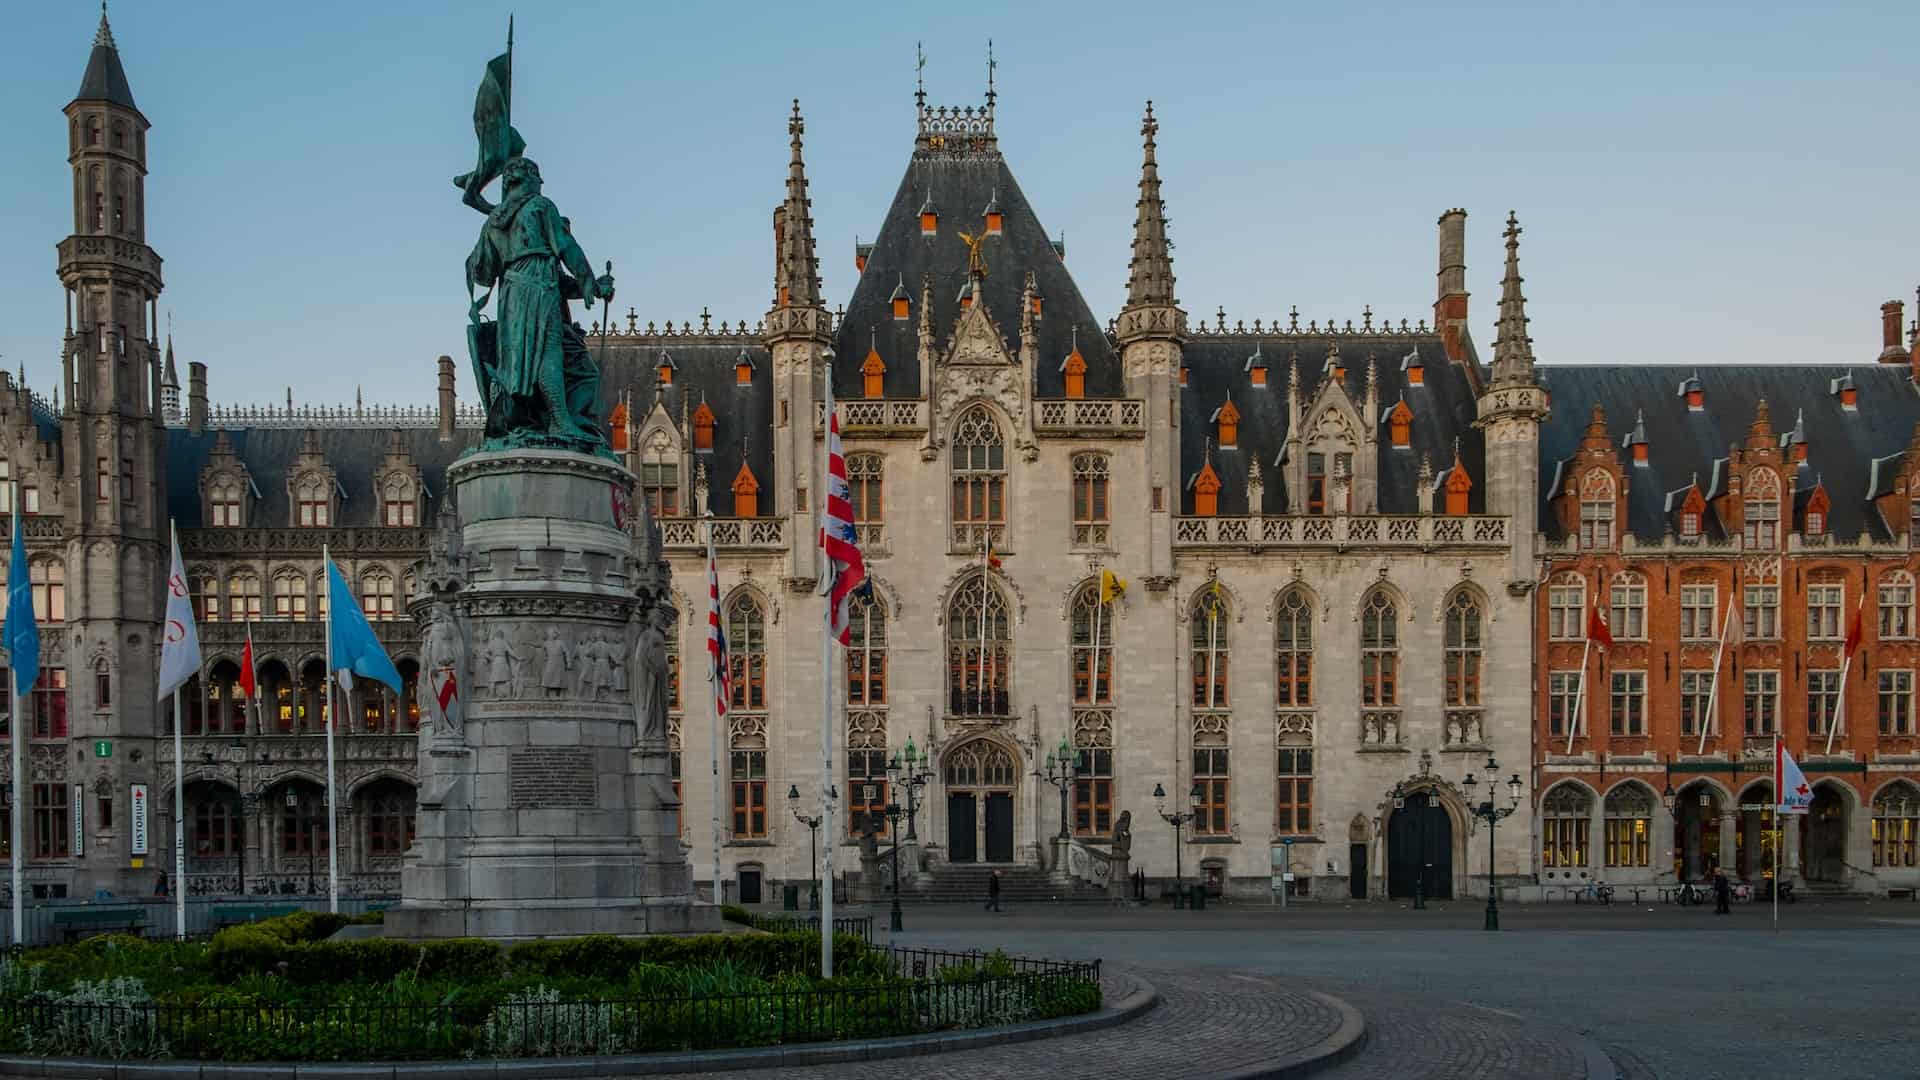 Best things to do in Bruges Belgium - Shane Mahoney - Provincial Court by Elijah G on Unsplash